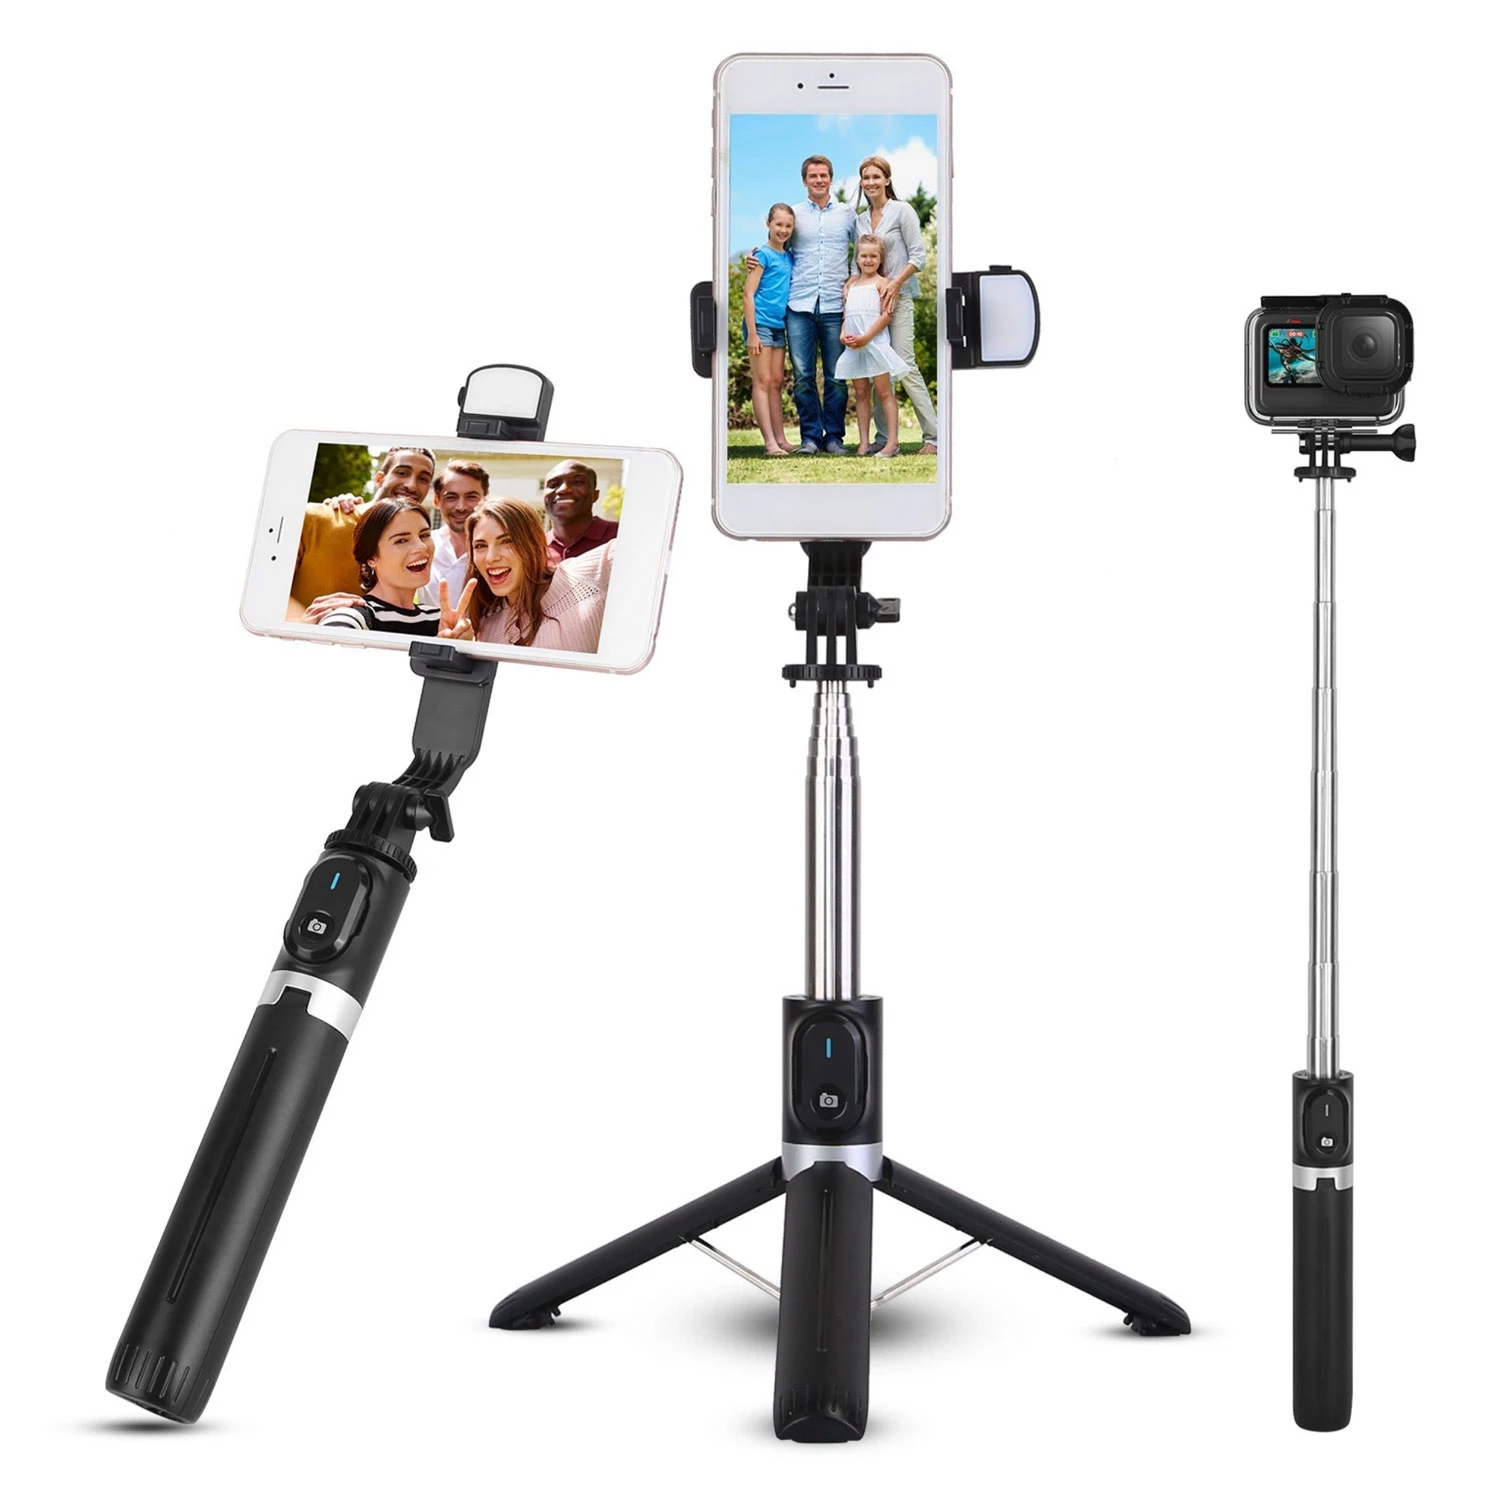 Wireless Selfie Stick Tripod: Portable And Foldable with Fill Lights And Remote Shutter